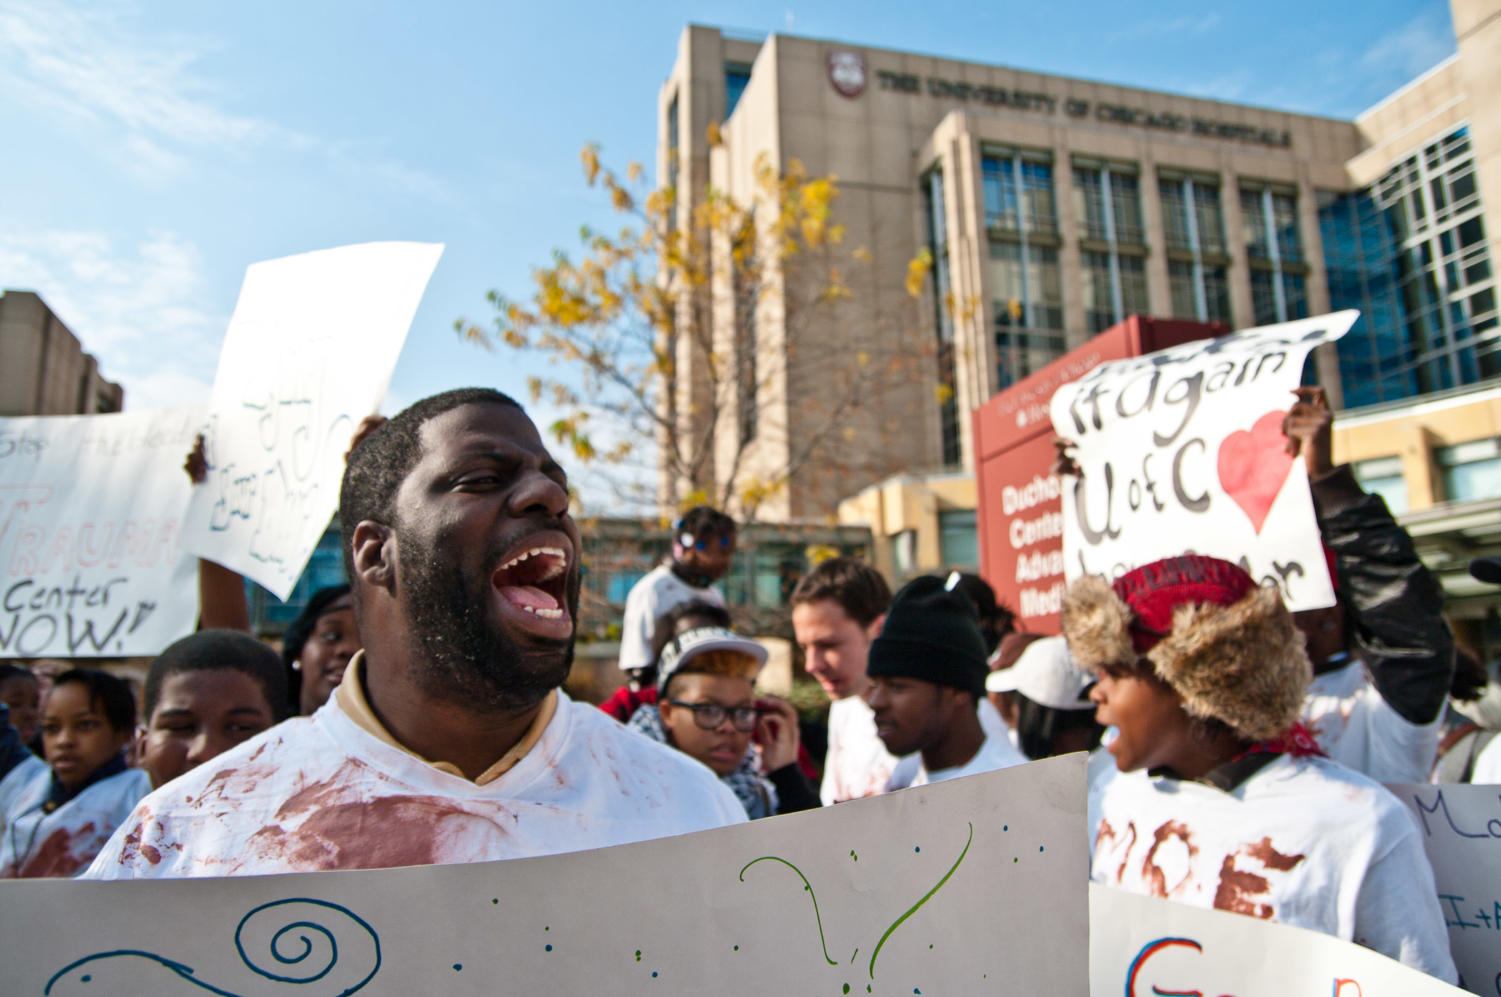 20th Ward Alderman candidate, Che Smith a.k.a. Rhymefest, participates in a protest that was organized by Fearless Leading by the Youth (FLY) Friday afternoon to call for the University of Chicago Hospital to open a trauma center.